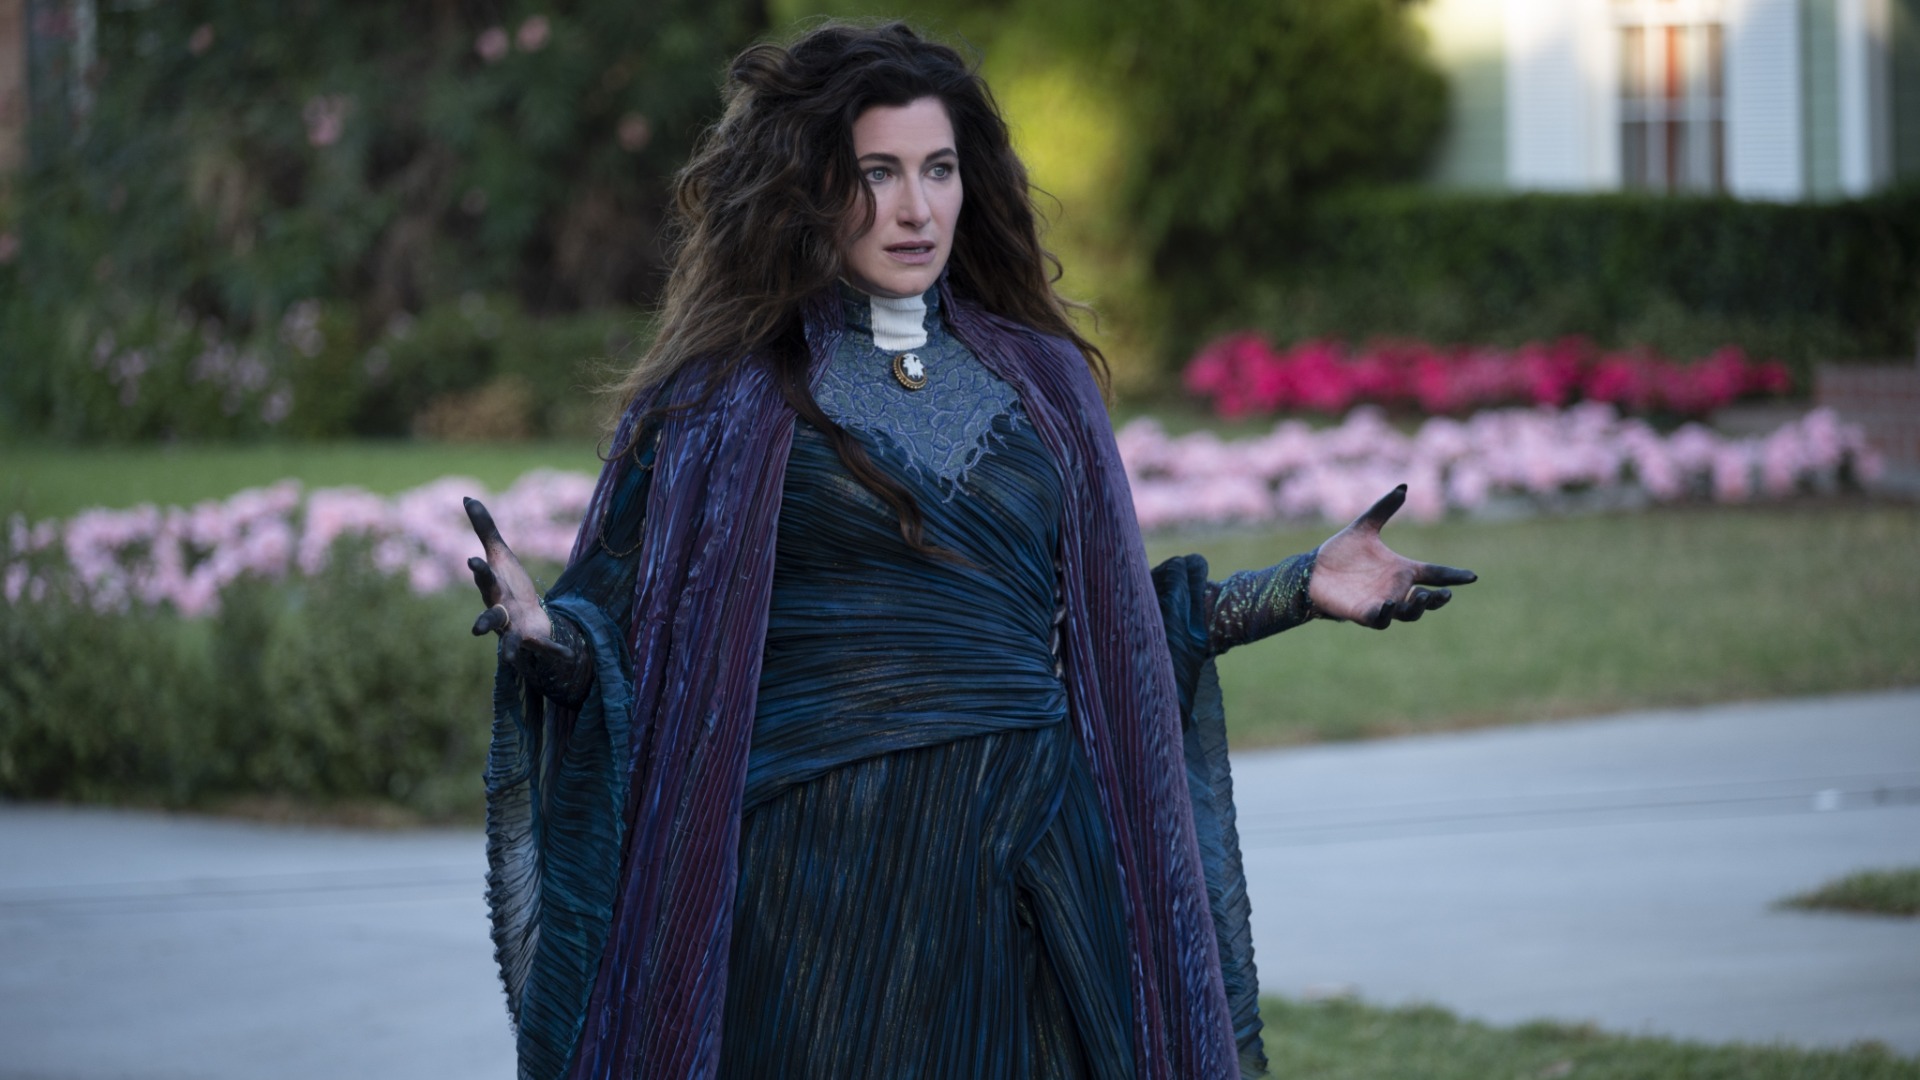 Kathryn Hahn in WandaVision, one of the new Marvel TV shows